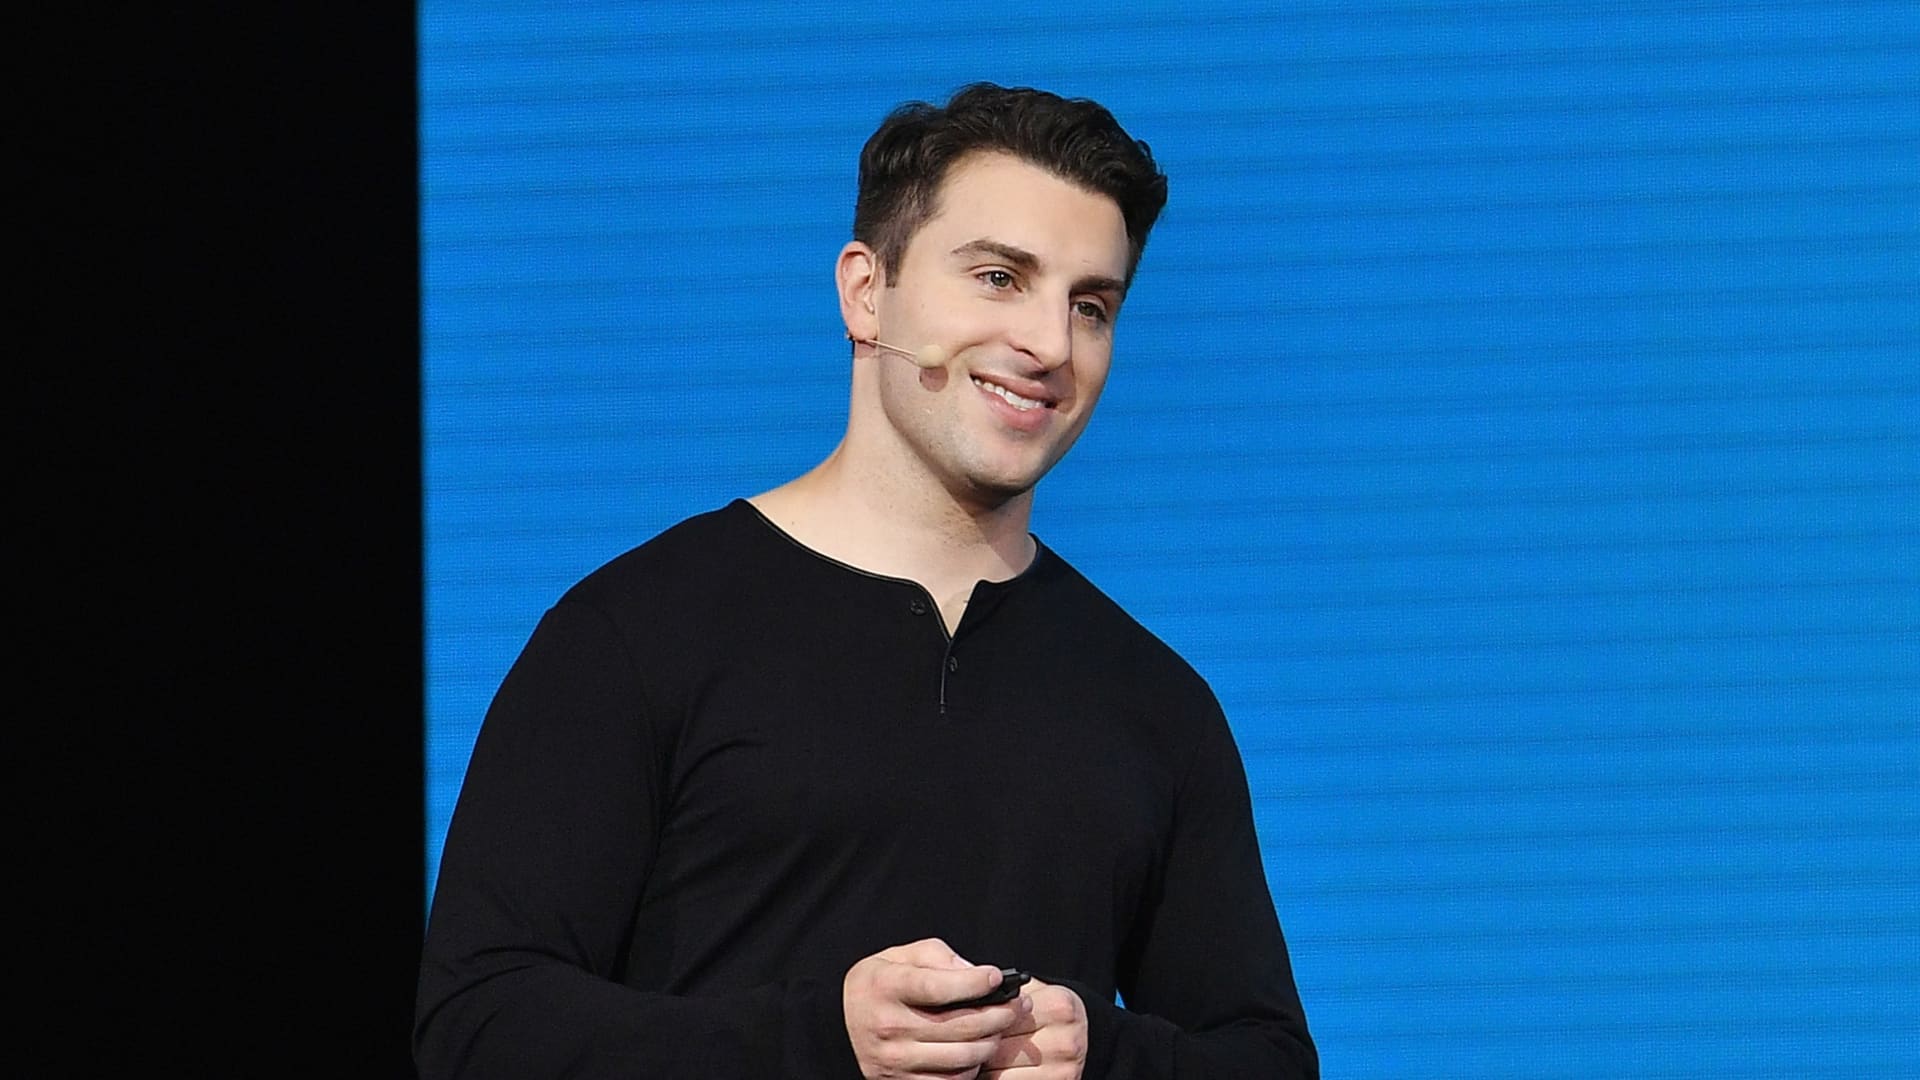 A.I. will make having a lucrative side hustle or startup much easier, says Airbnb CEO